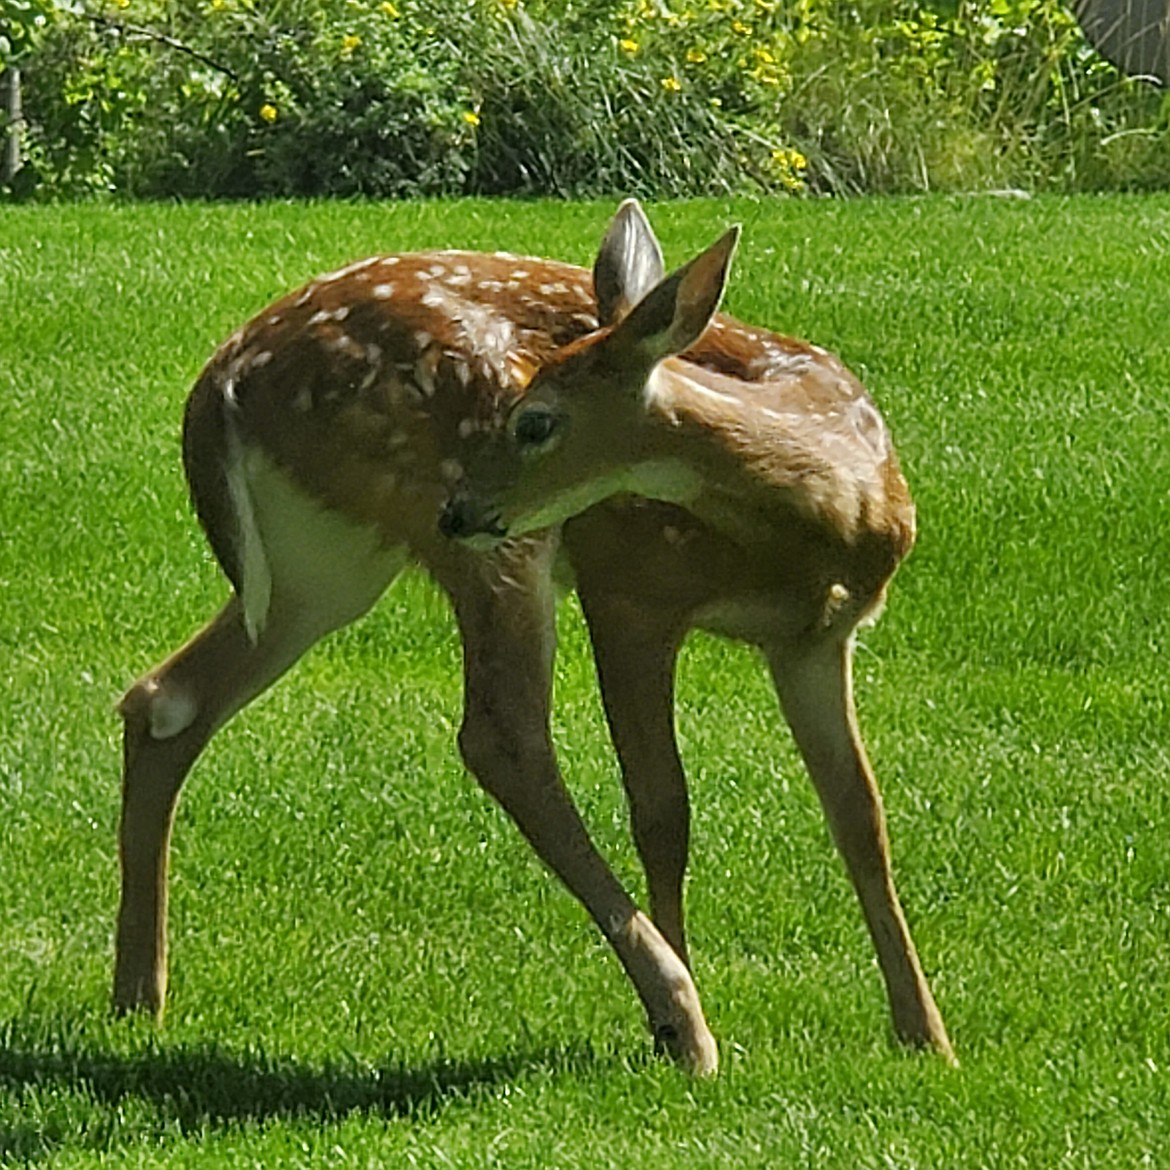 The fawn, colored reddish with white spots for camouflage, may have 300 spots on his coat.